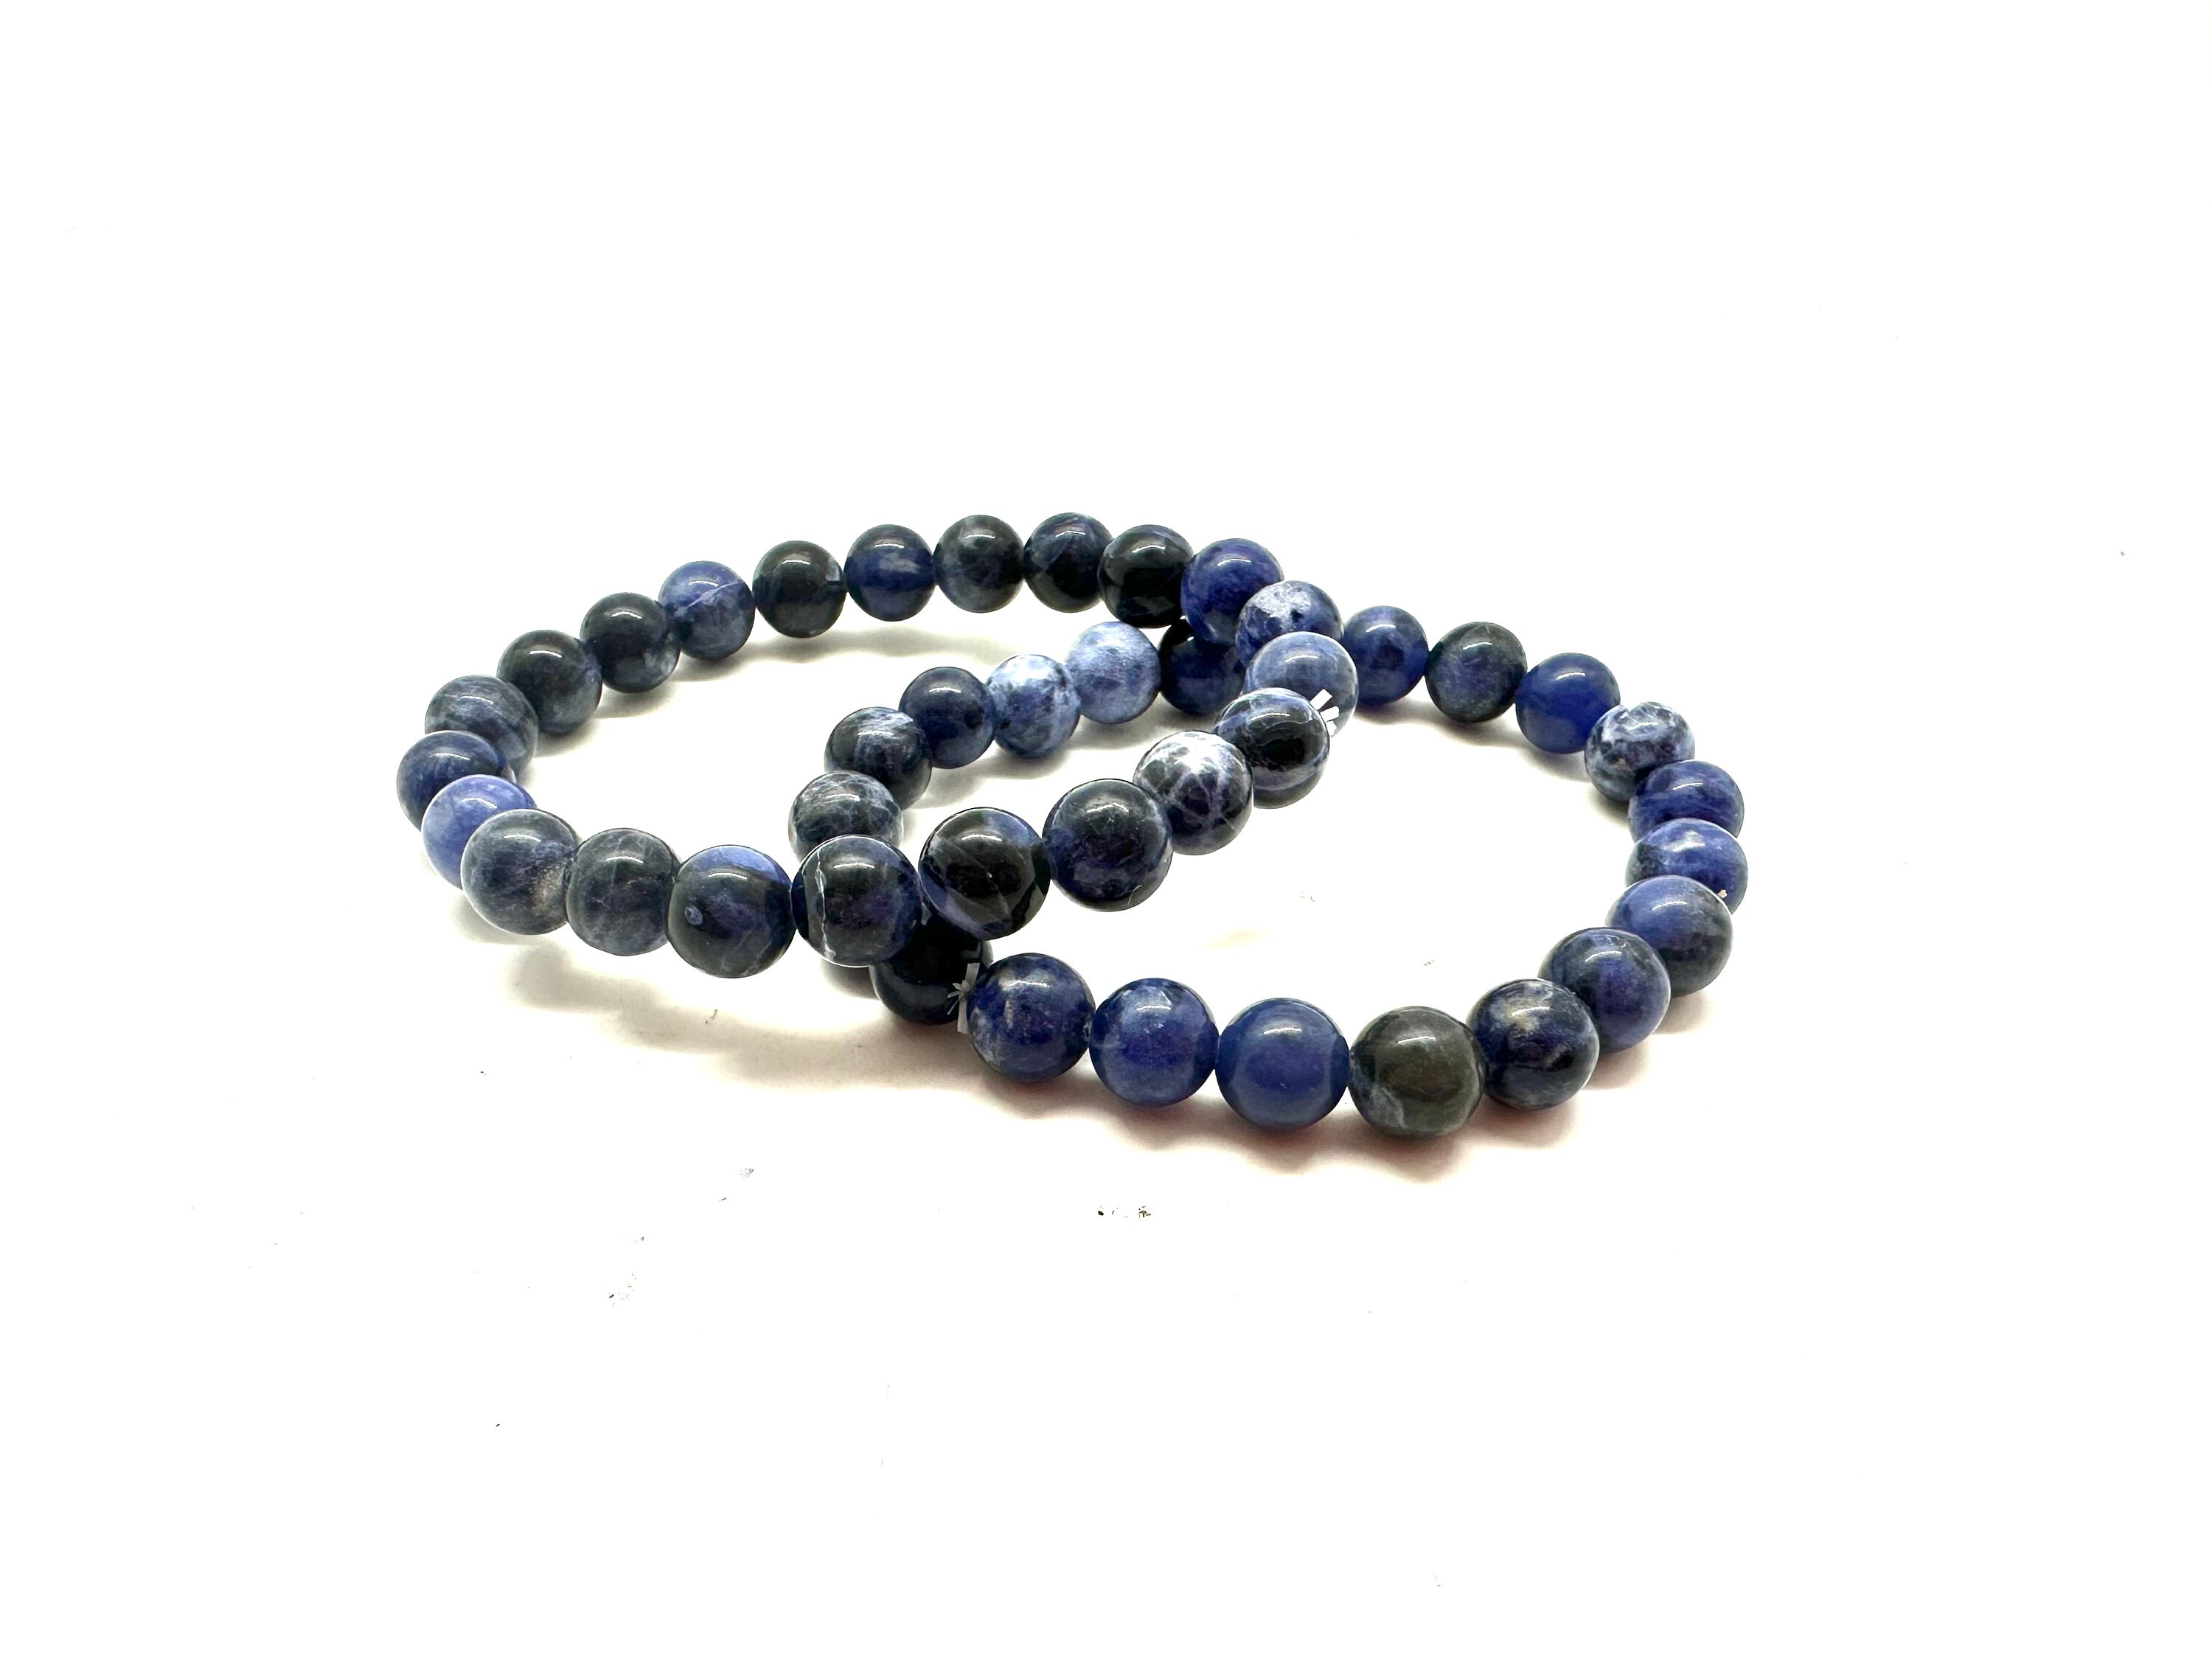 Oval Sodalite Bracelet – For developing intuition - Engineered to Heal²